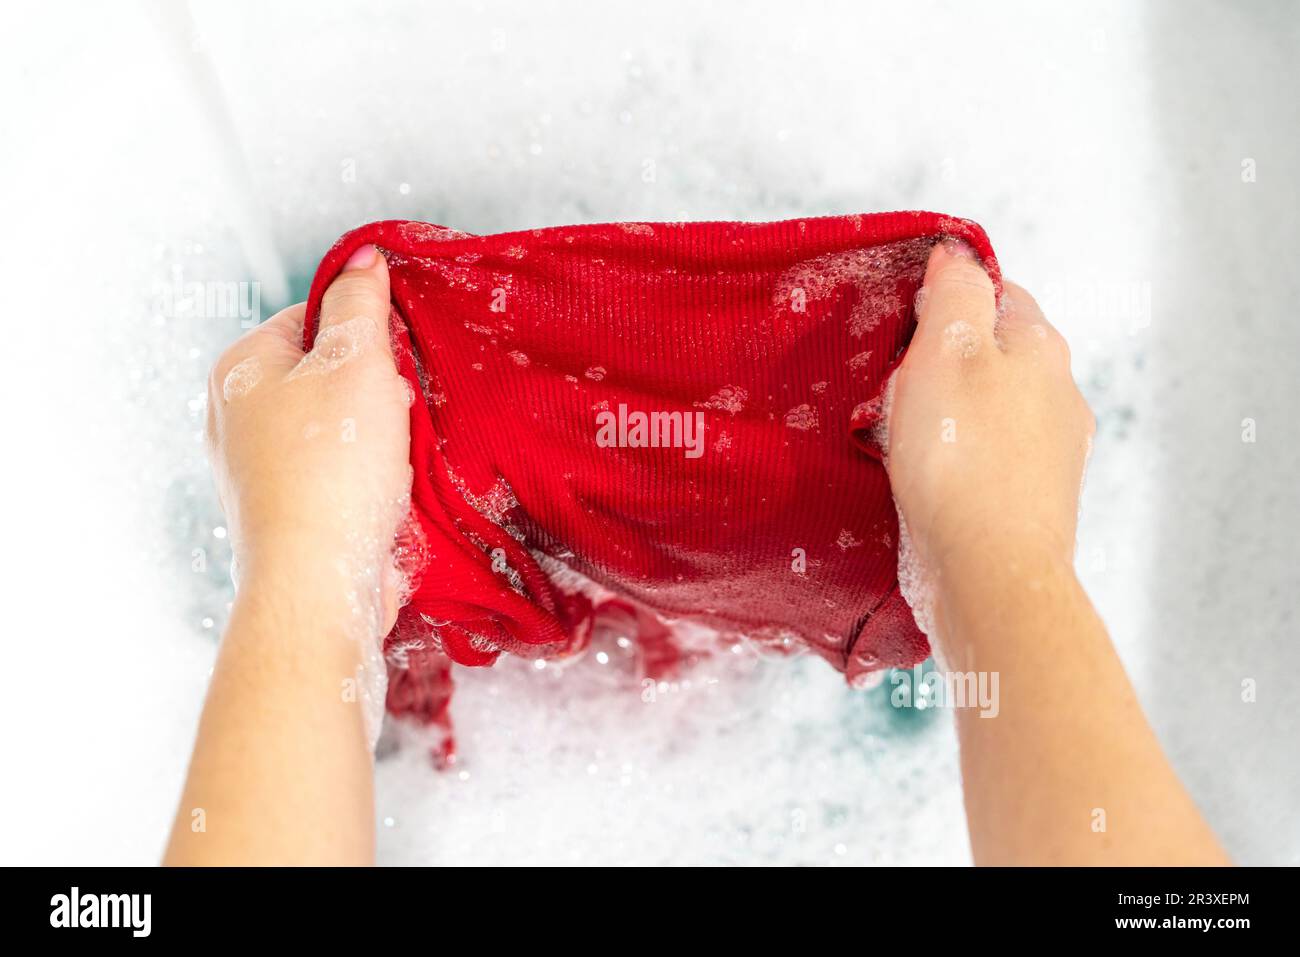 Removing stain with handwash from red clothes Stock Photo